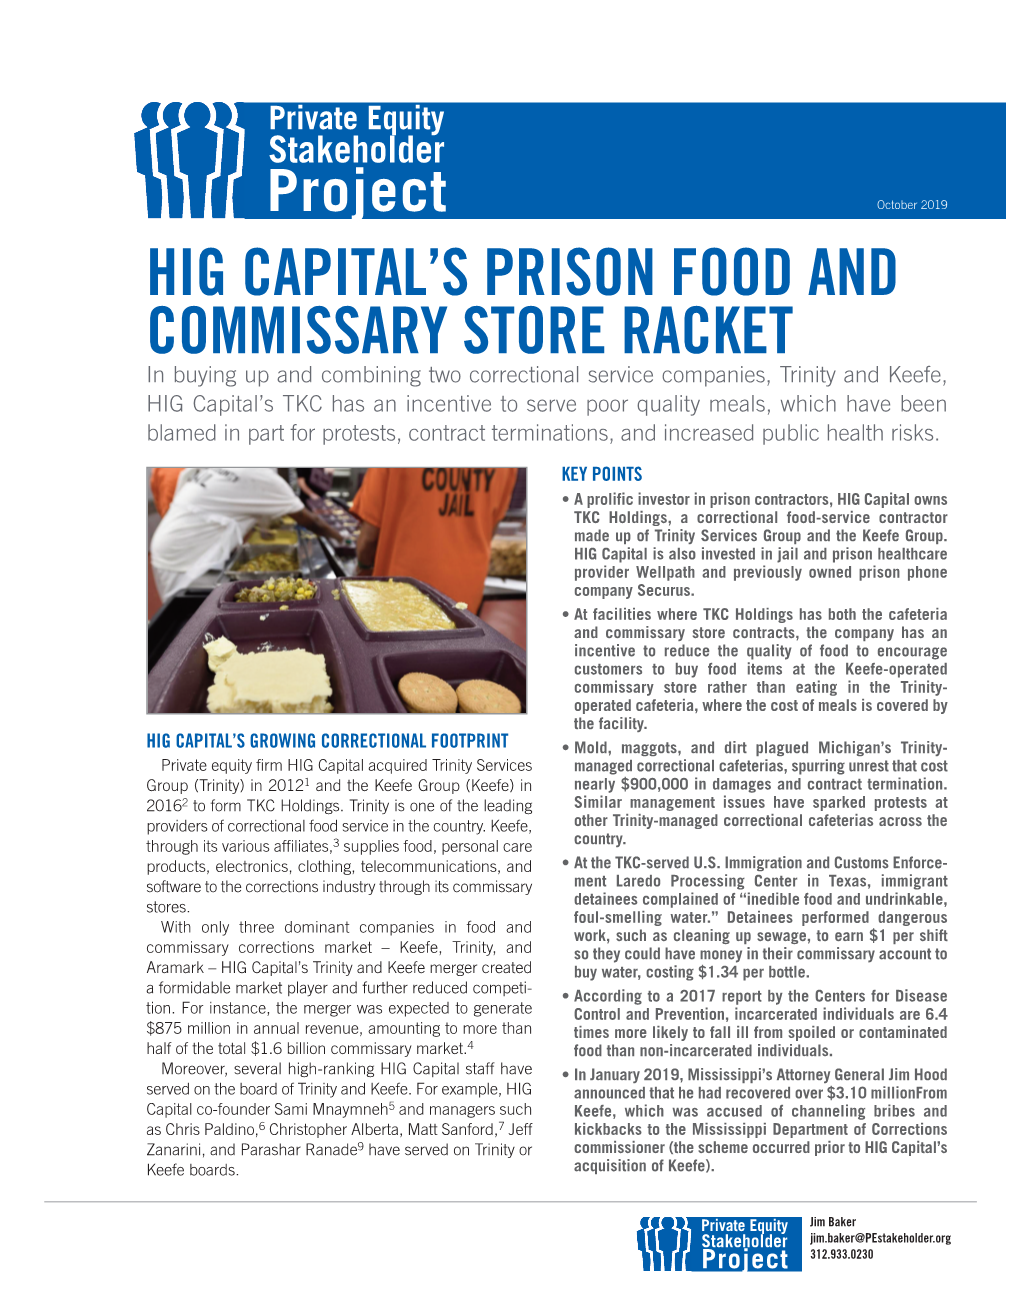 Hig Capital's Prison Food and Commissary Store Racket